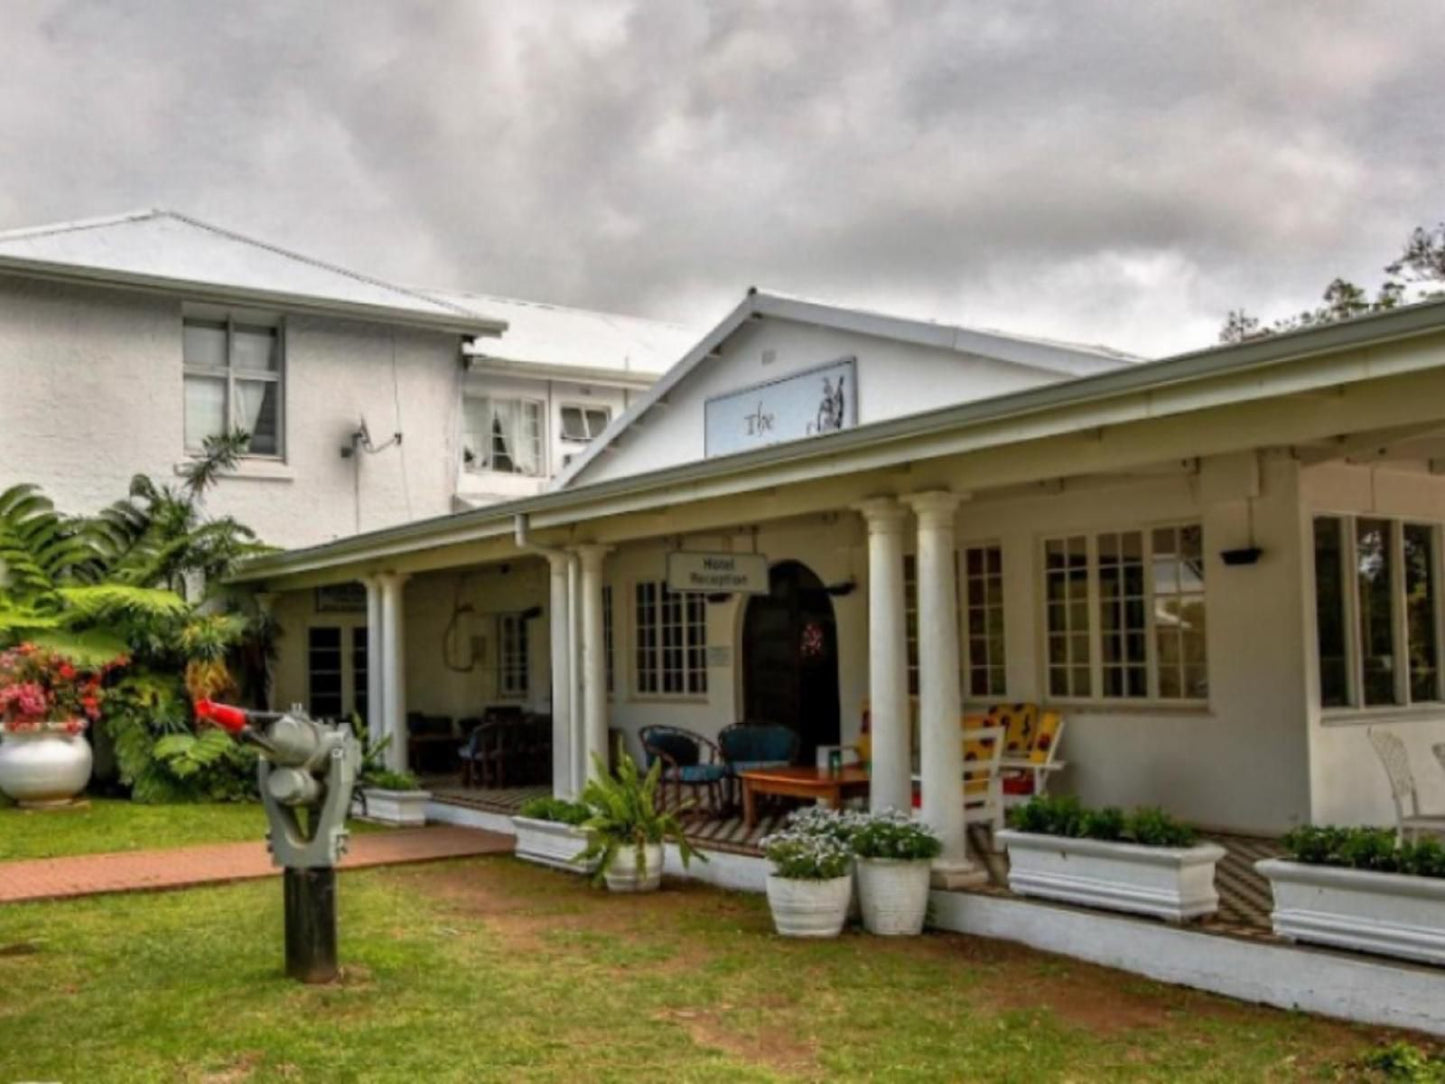 The George Hotel Eshowe Kwazulu Natal South Africa House, Building, Architecture, Palm Tree, Plant, Nature, Wood